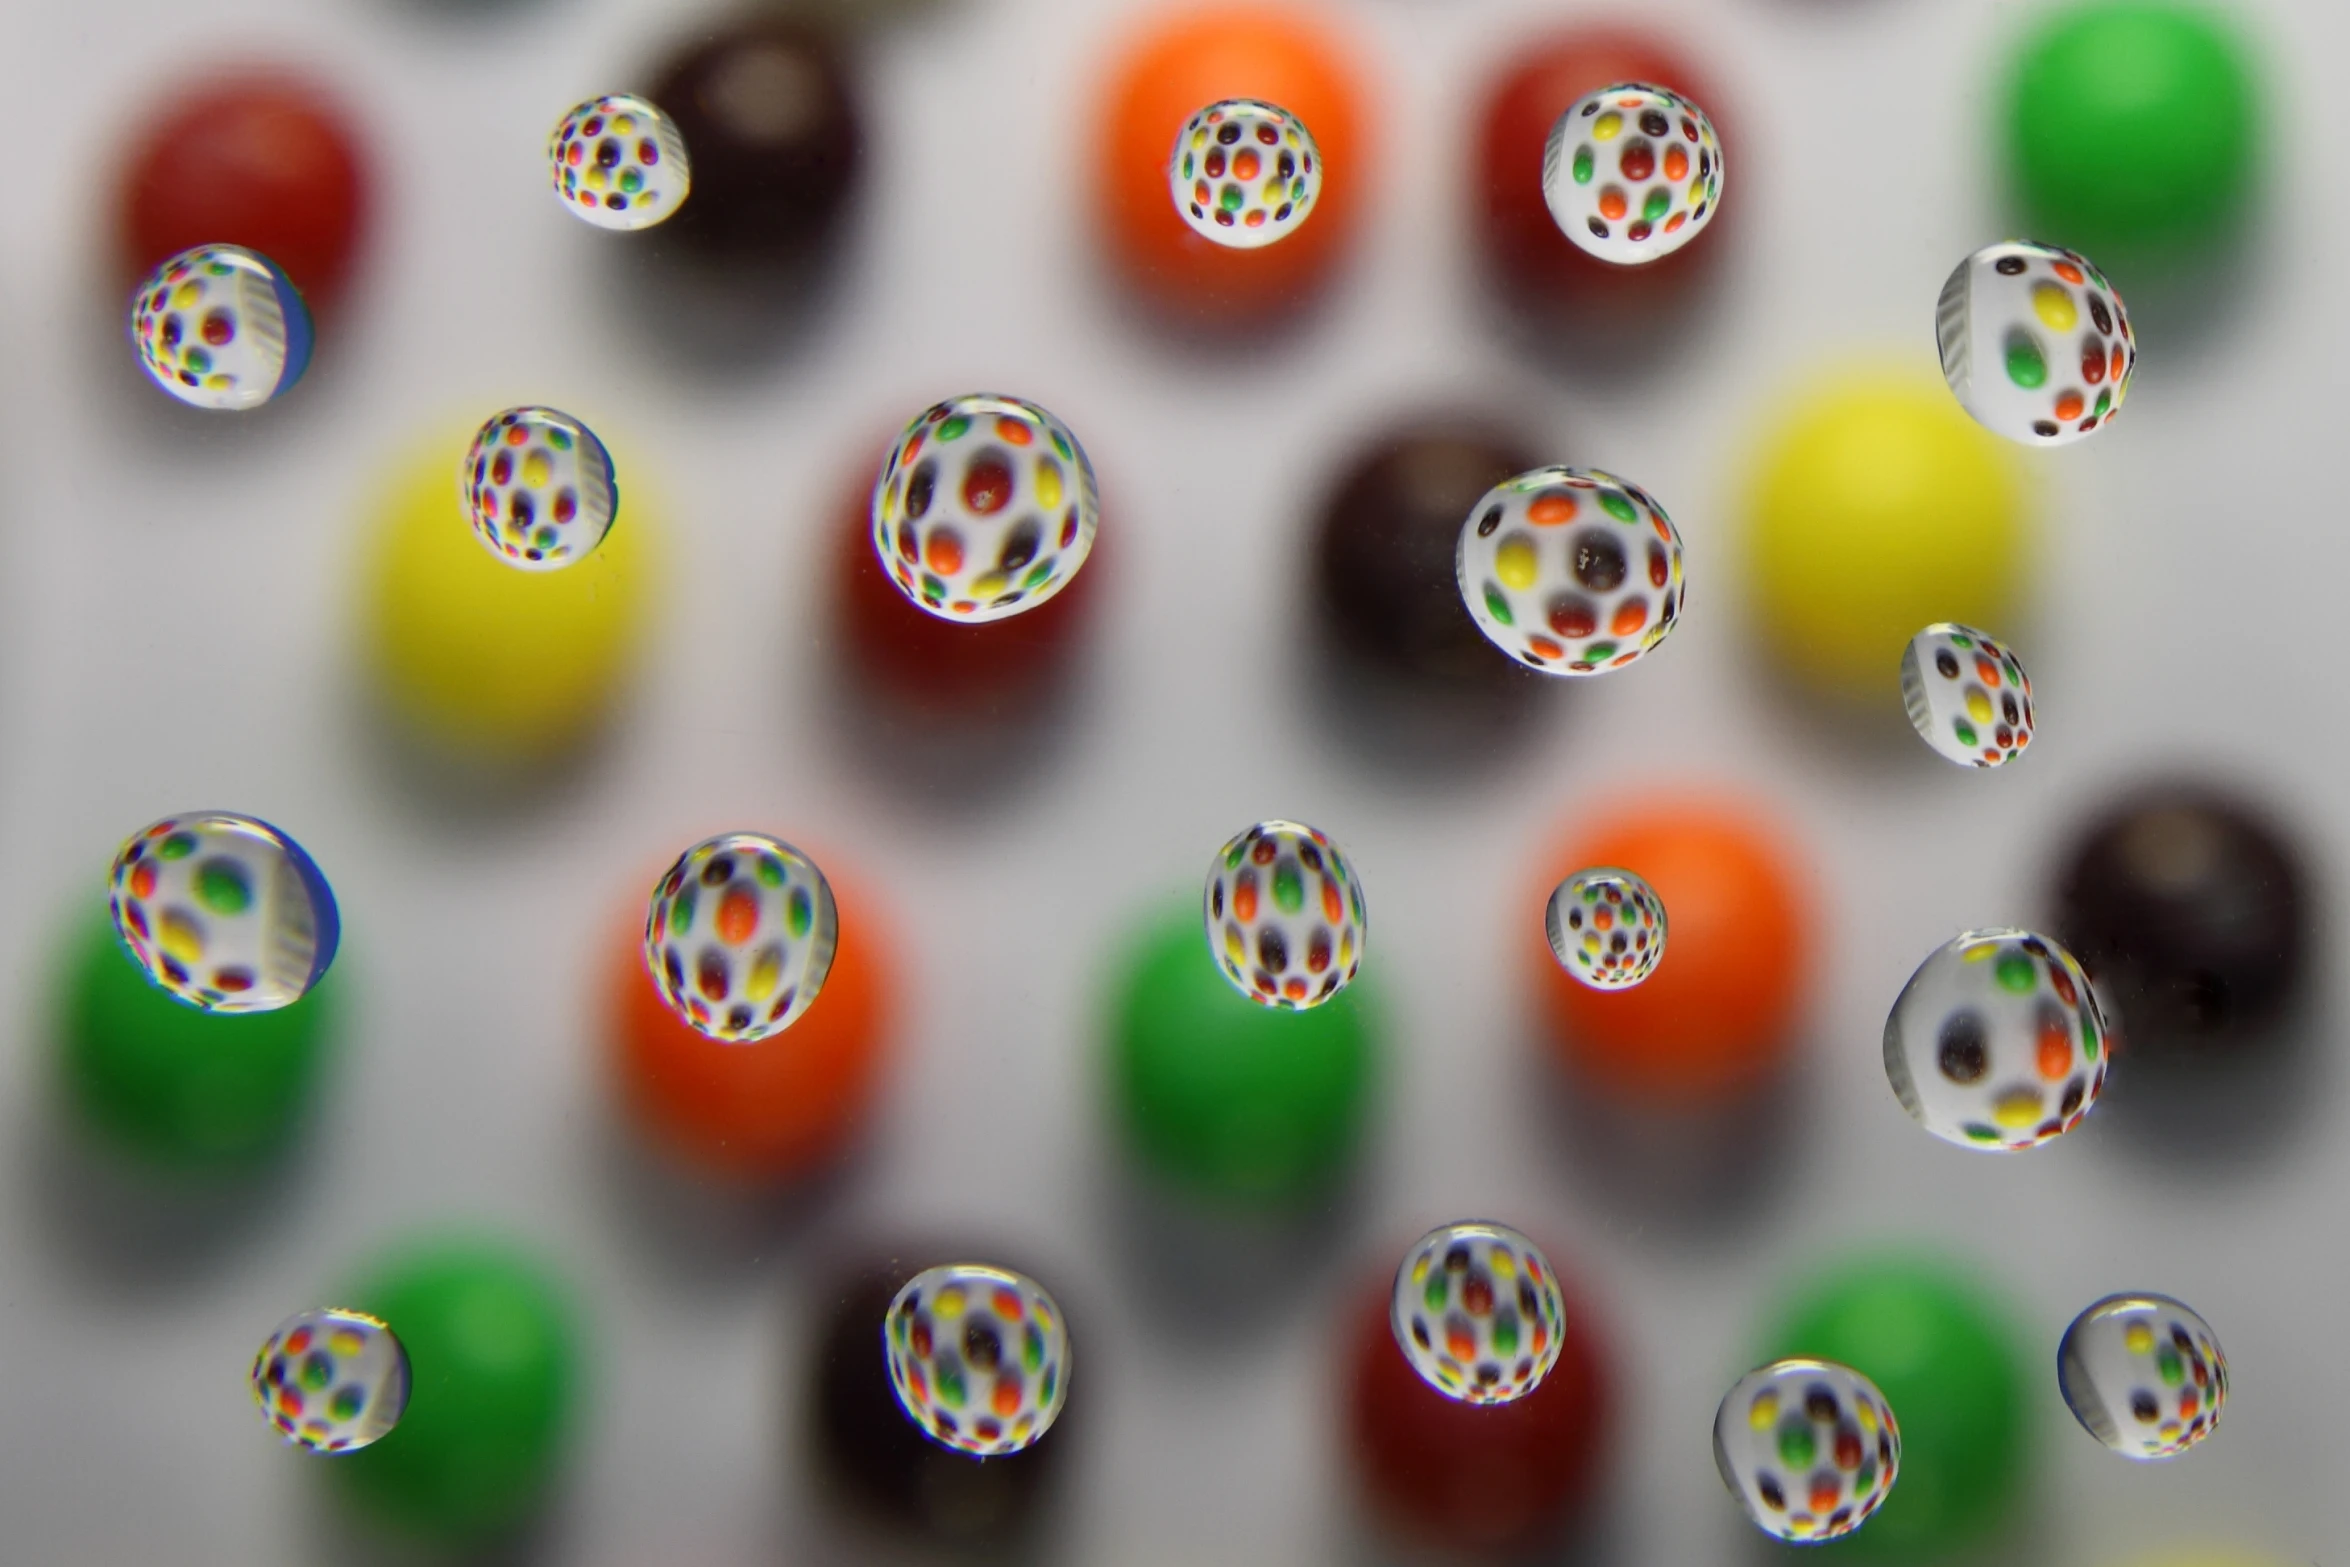 a picture of some very small colored balls